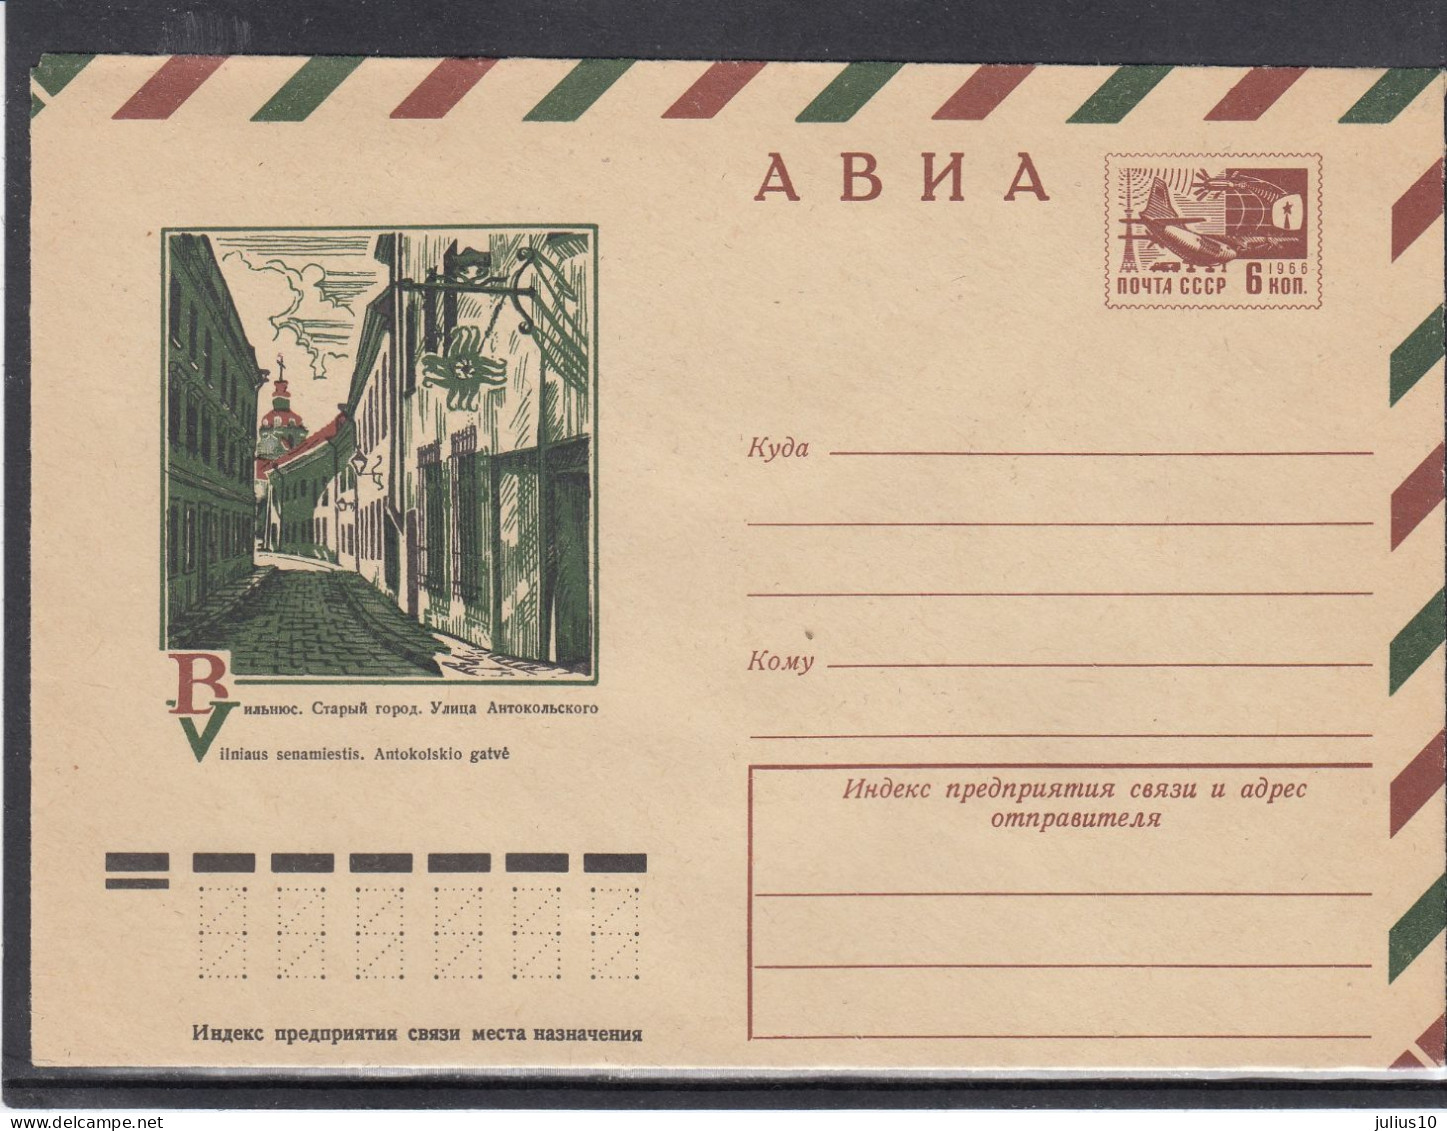 LITHUANIA (USSR) 1975 Cover Vilnius Old Town #LTV98 - Lithuania